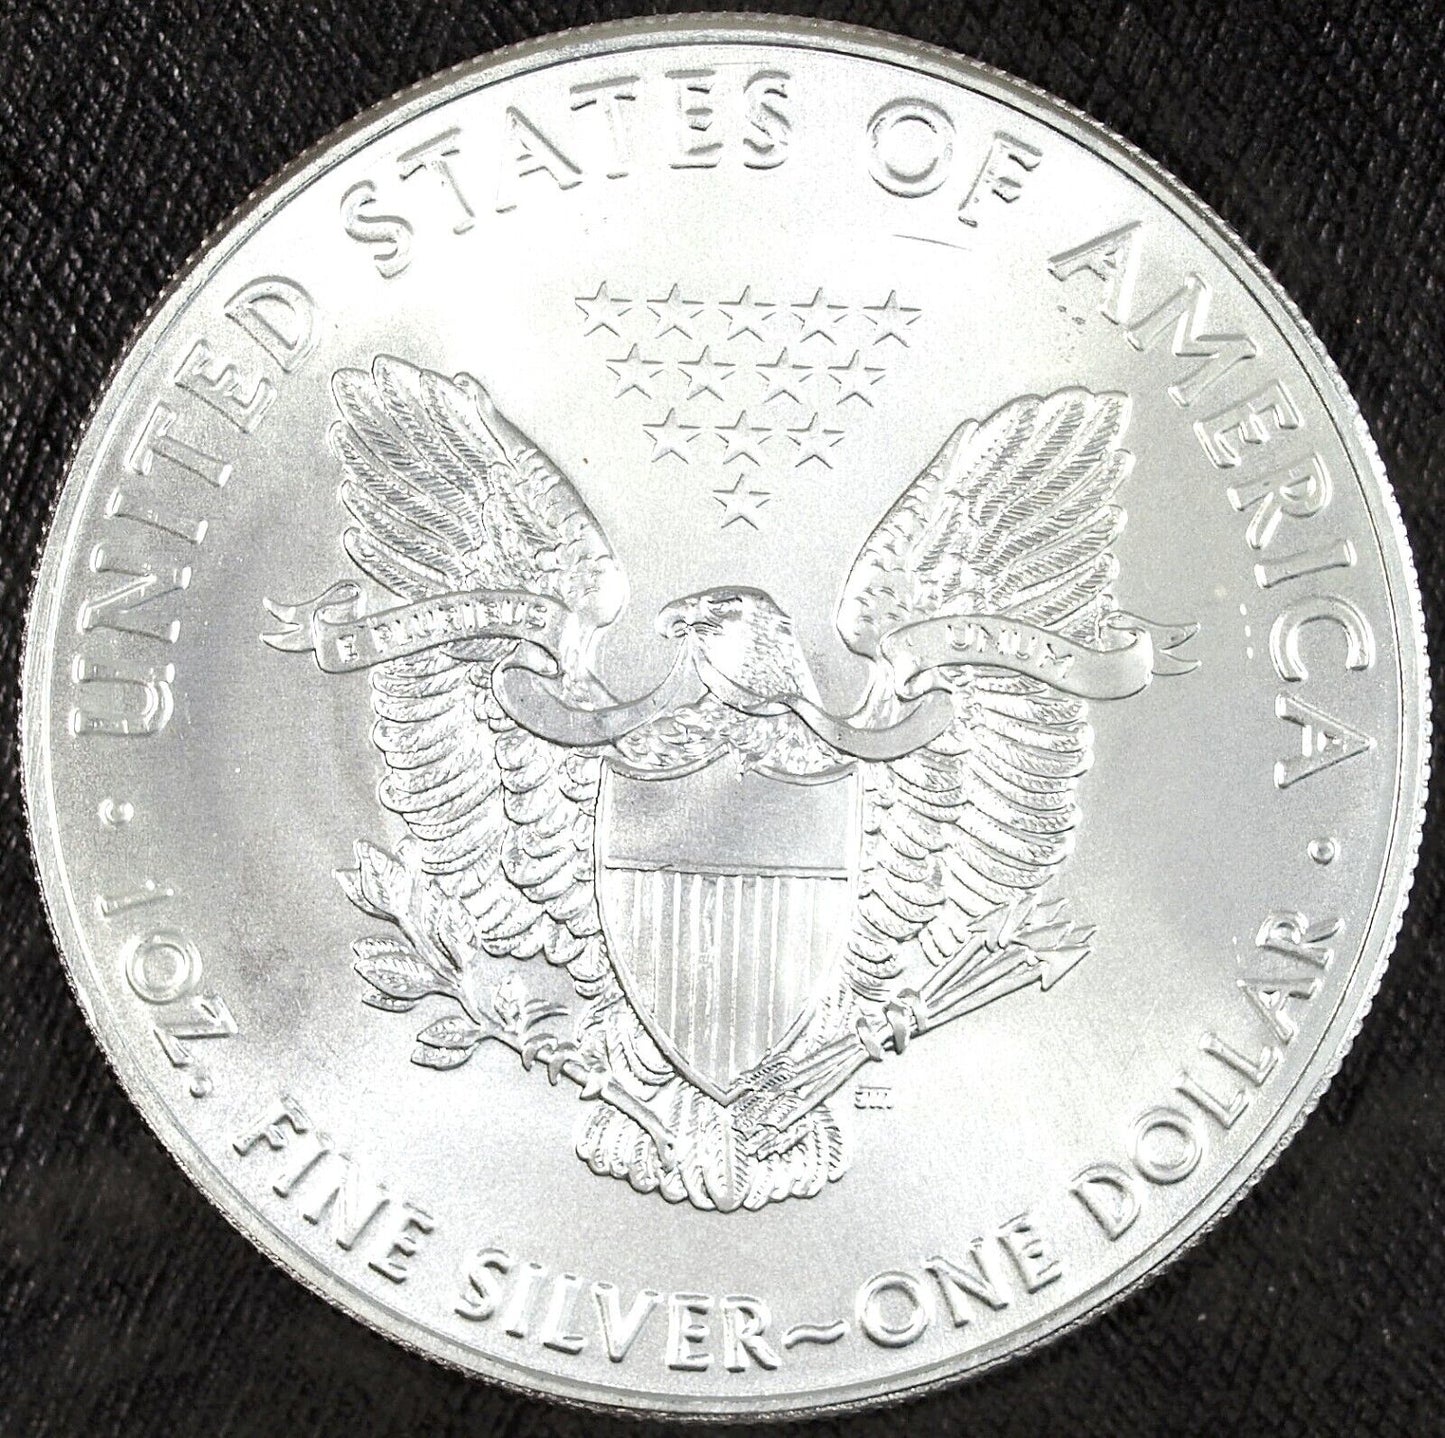 2016 U.S. Mint American Silver Eagle ☆☆ Uncirculated ☆☆ Great Collectible 505